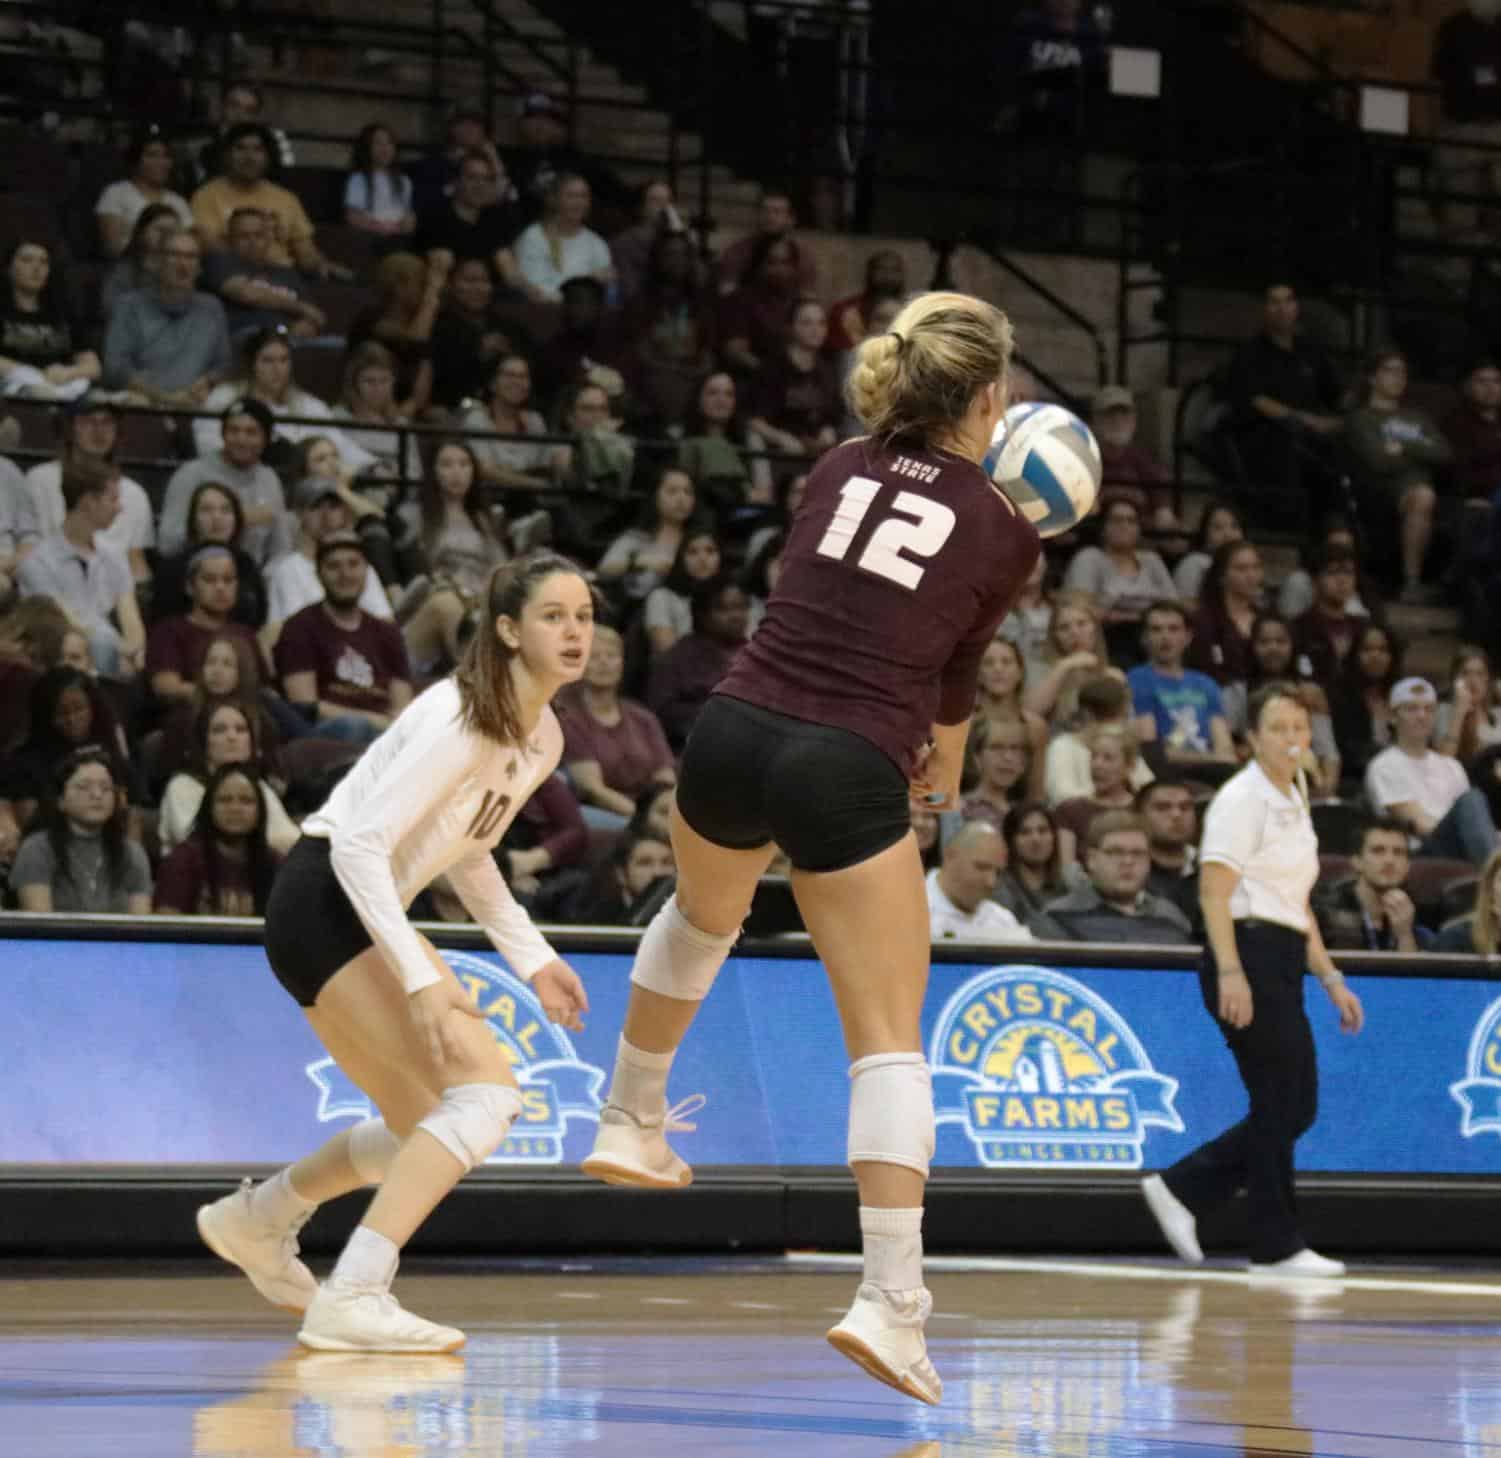 %28Gallery%29+Texas+State+volleyball+vs.+Troy%2C+2019+Sun+Belt+Conference+Championship+Tournament